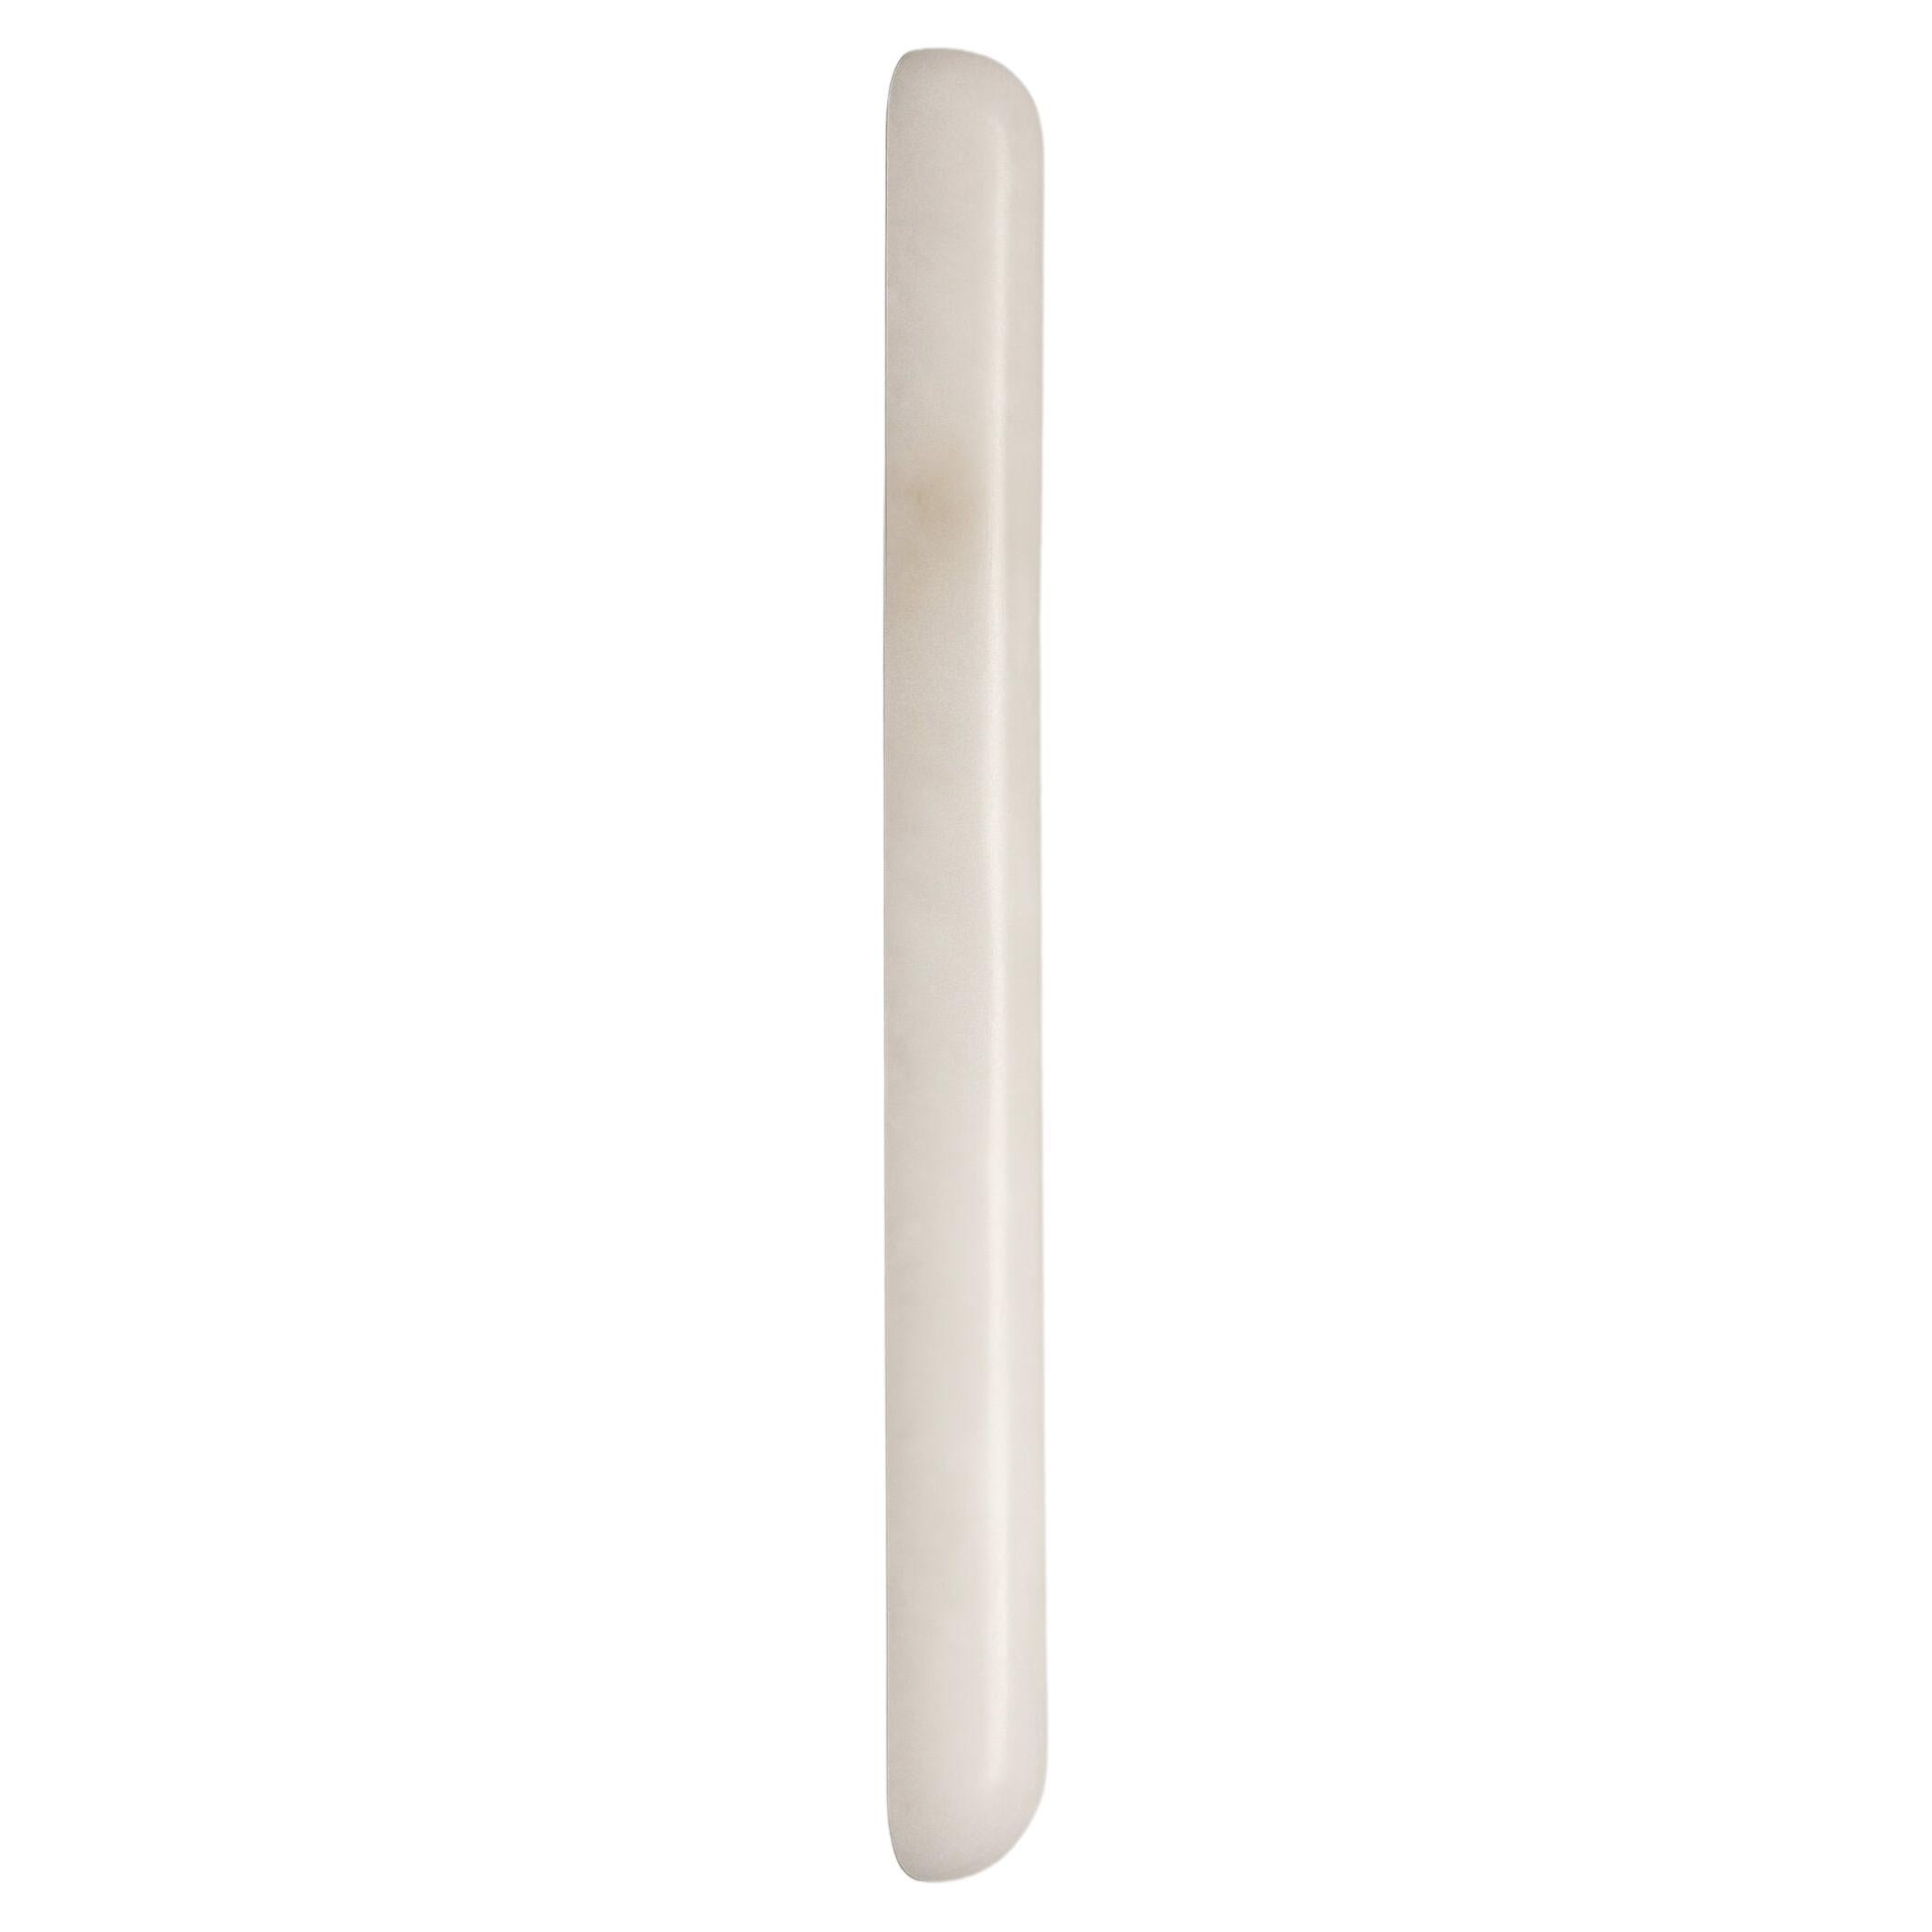 Tub 45 Alabaster Wall Light by Contain